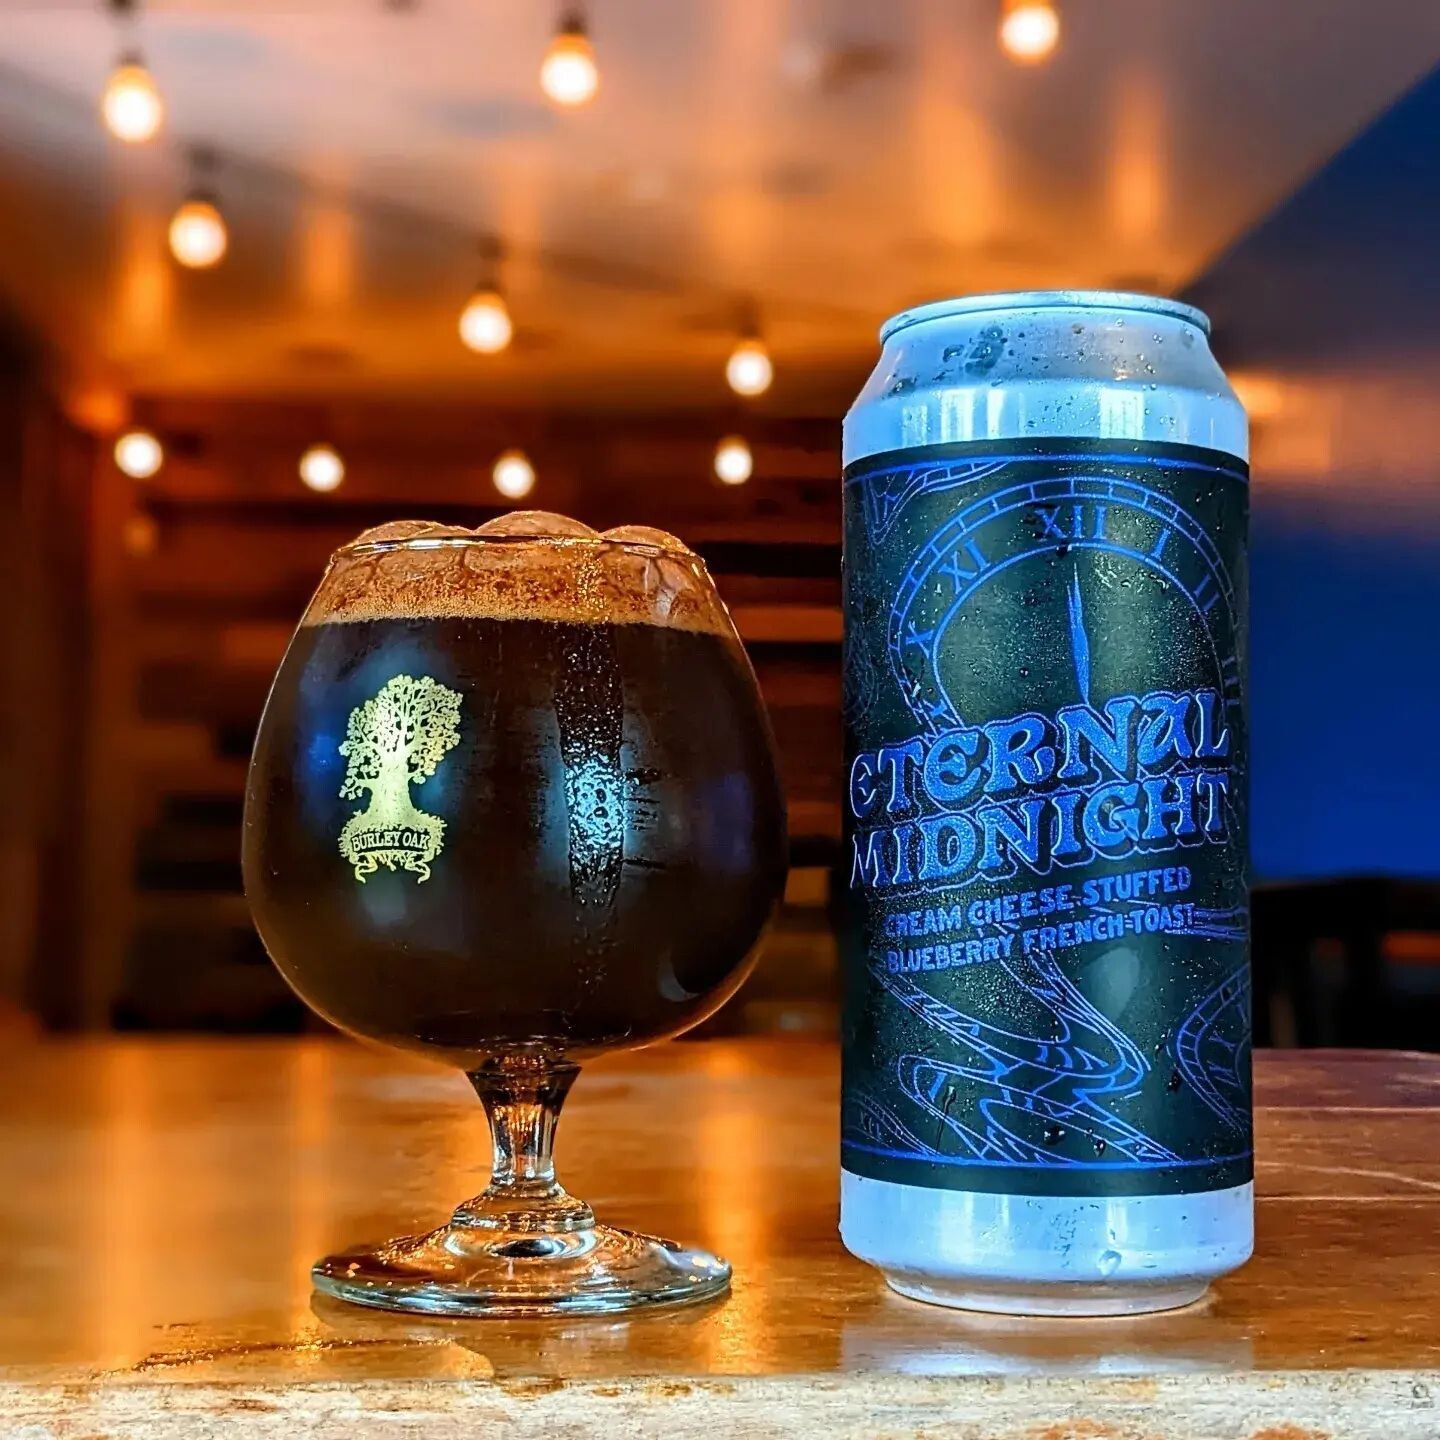 Burley Oak Brewing Company Cream Cheese Stuffed Blueberry French Toast Eternal Midnight Pastry Stout (16OZ CAN)